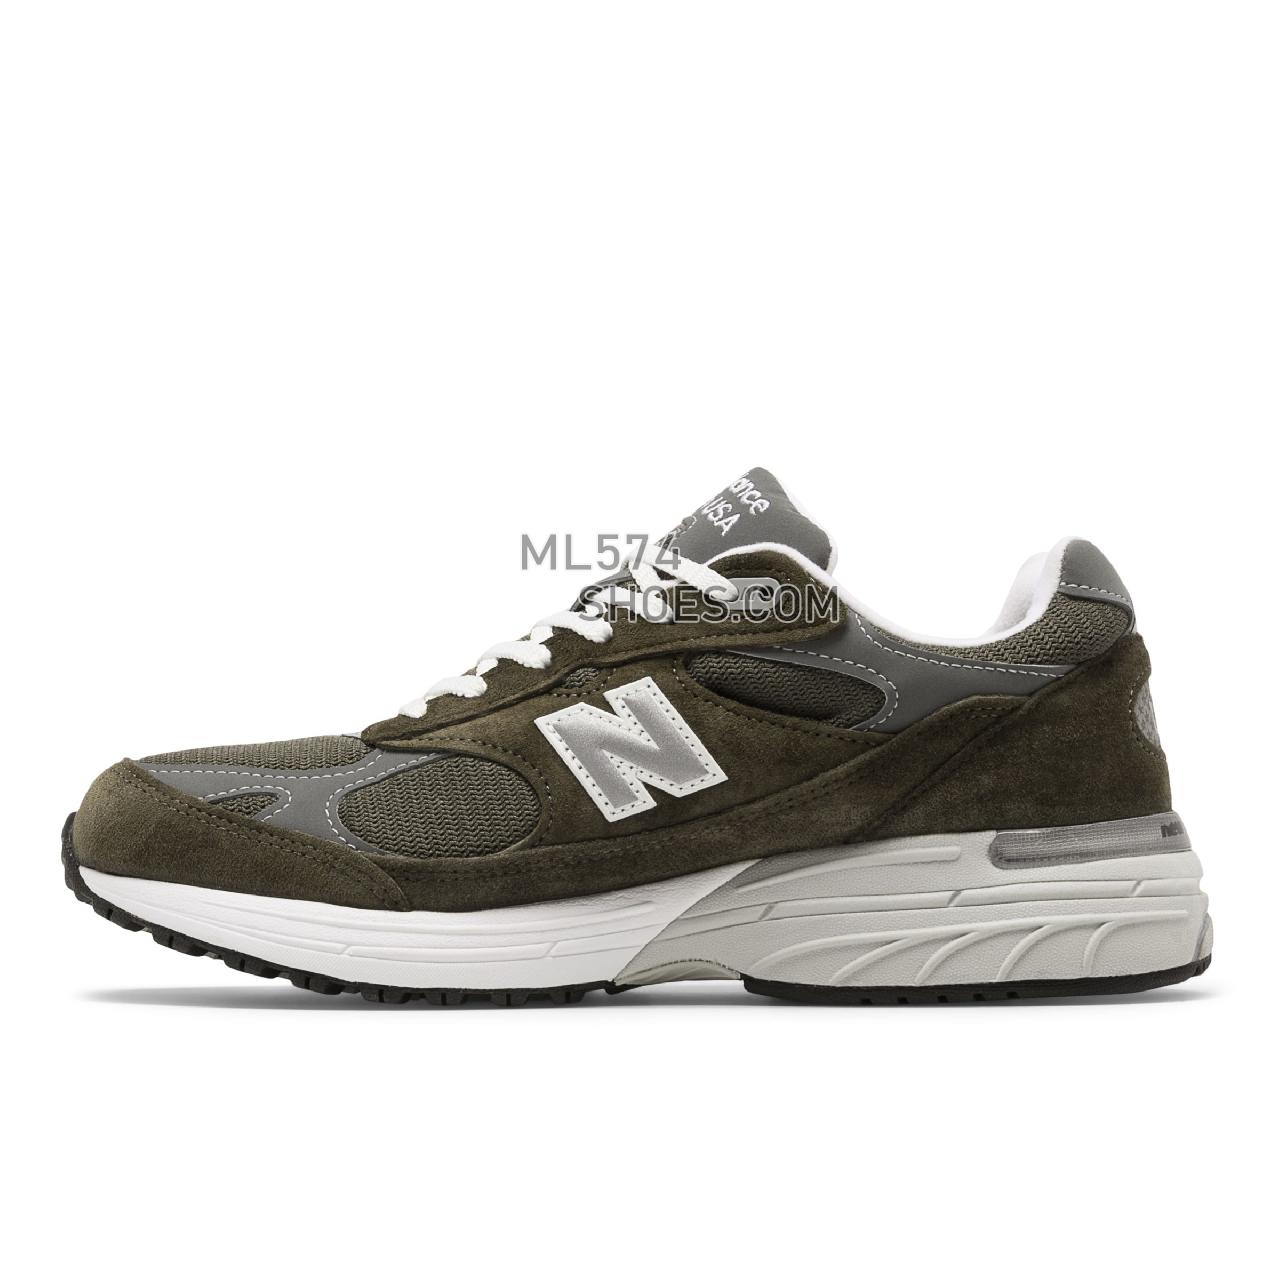 New Balance Made in USA 993 - Men's Classic Sneakers - Military Foliage Green with Grey - MR993MG